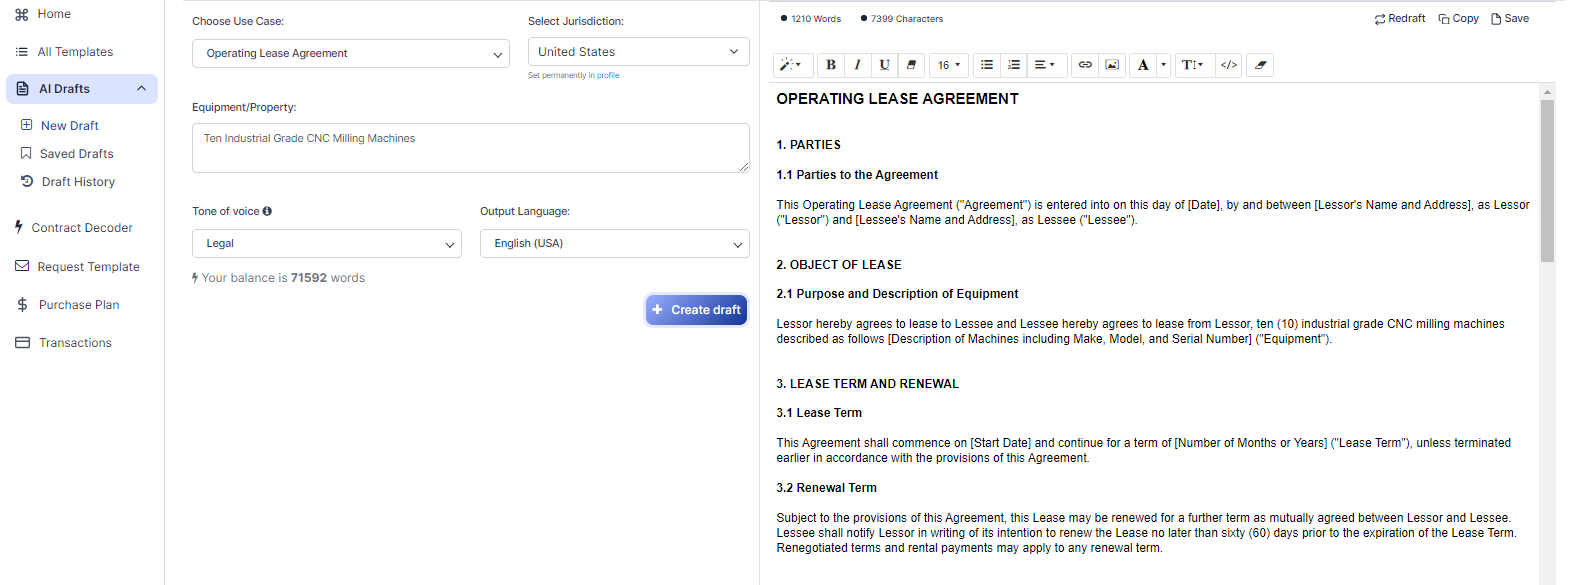 Operating Lease Agreement template